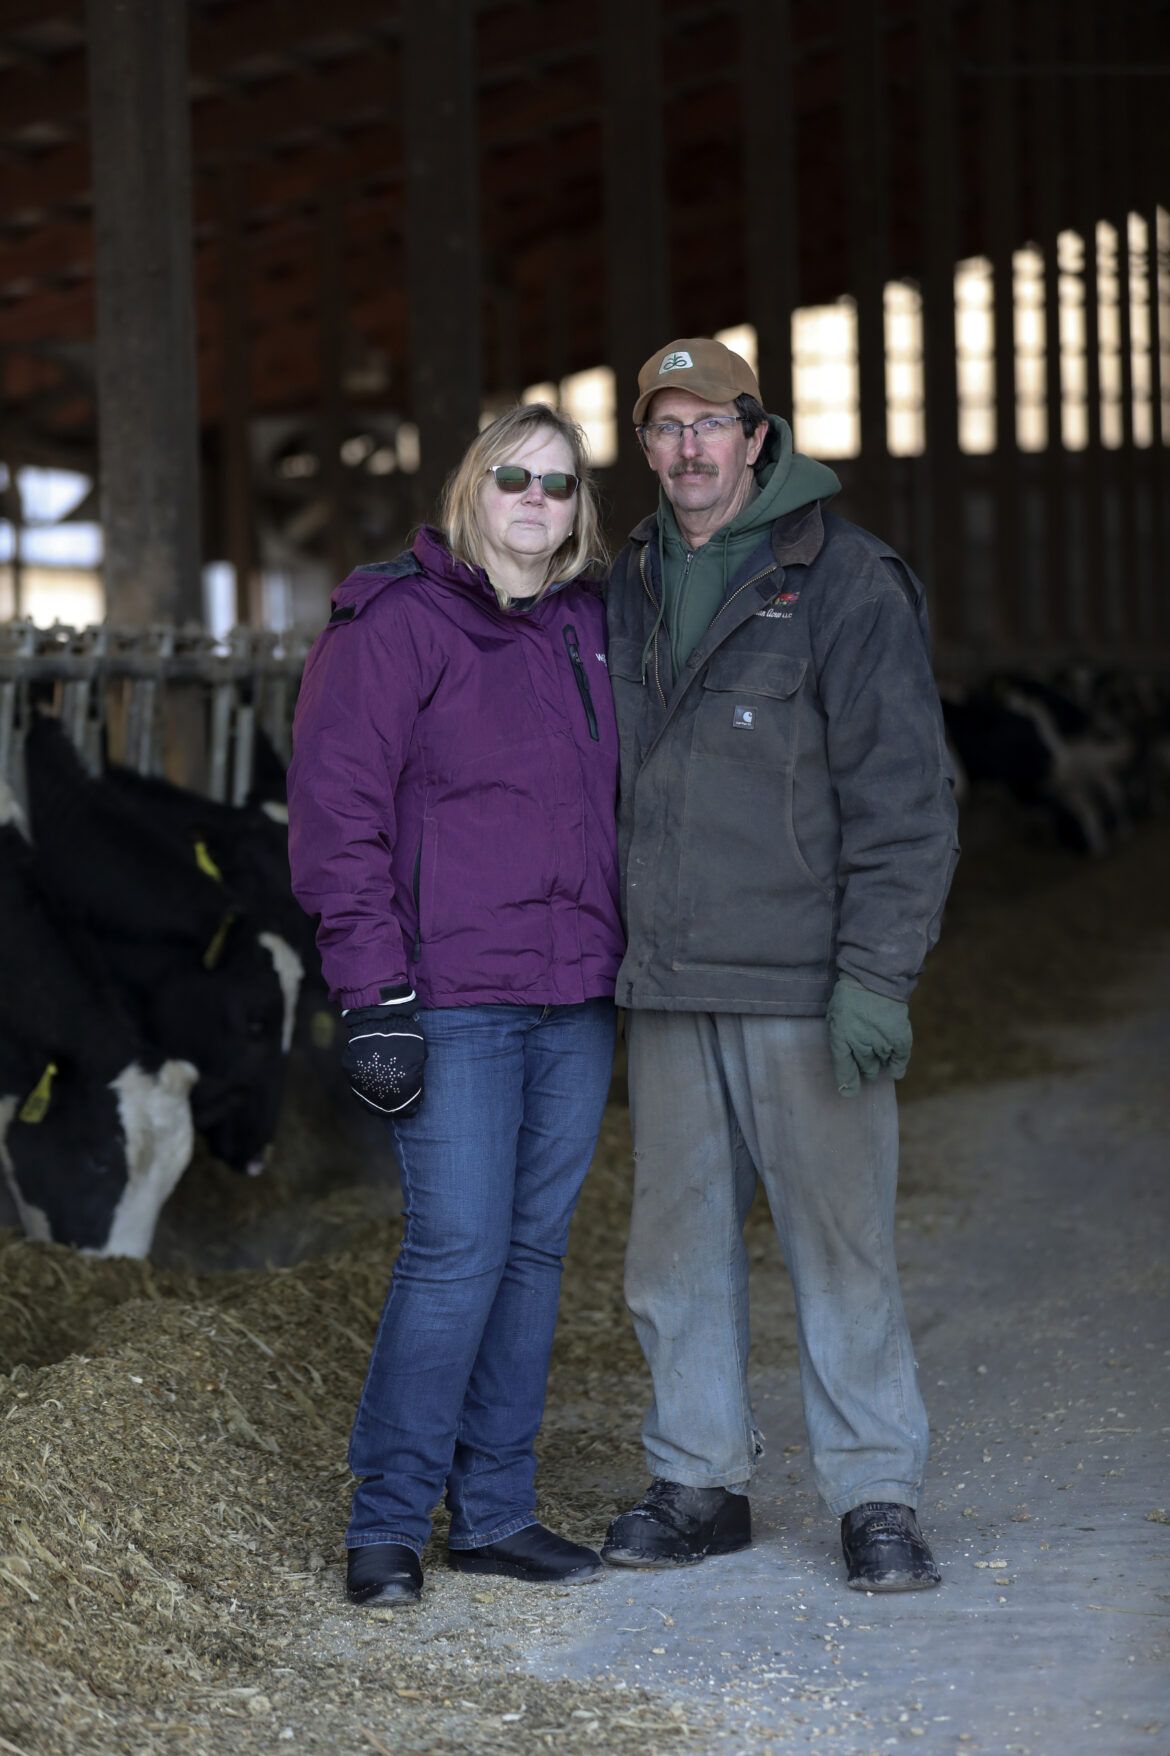 Amy and David Fischer are seen on their 350-cow dairy farm, Darian Acres, in Rio, Wis., on Dec. 18, 2020. Their son, Brian, died by suicide at the age of 33 on Dec. 21, 2016. Farmers are more likely to take their own lives than workers in many other professions, federal data show. Image by Coburn Dukehart / Wisconsin Watch. United States, 2020.